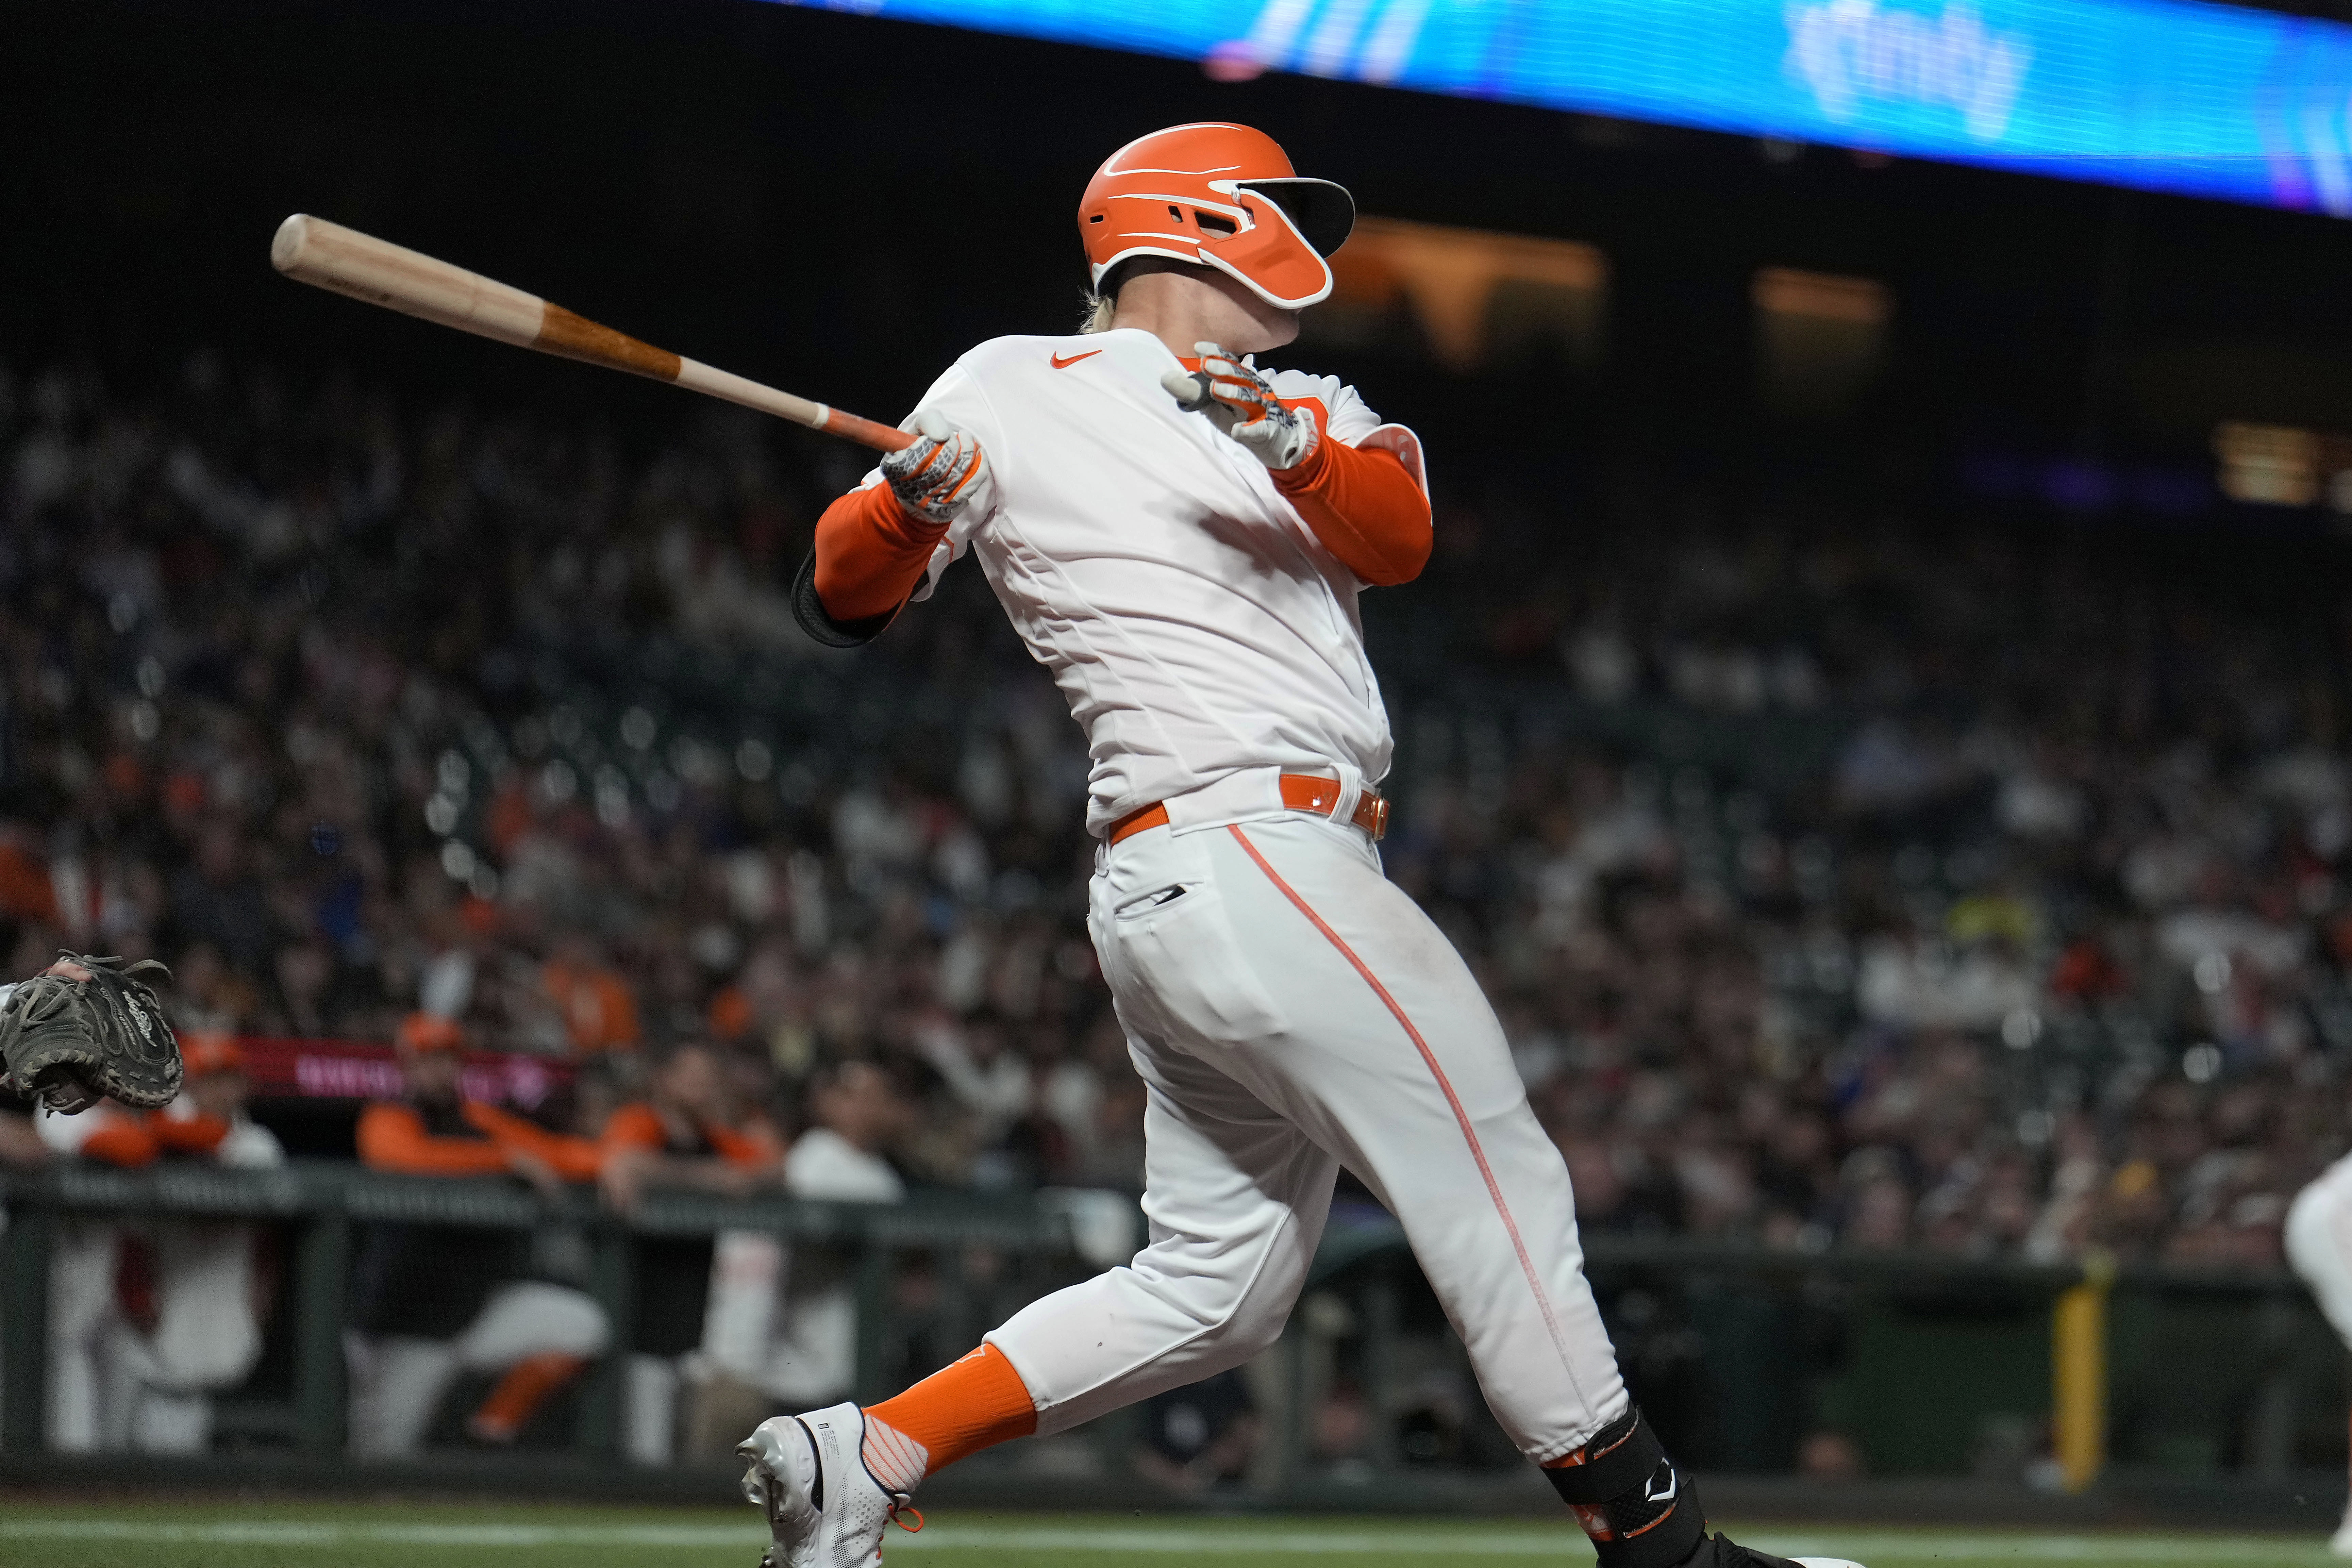 Giants' Joc Pederson explains why he called a fan a 'f–king p–sy' in 2022